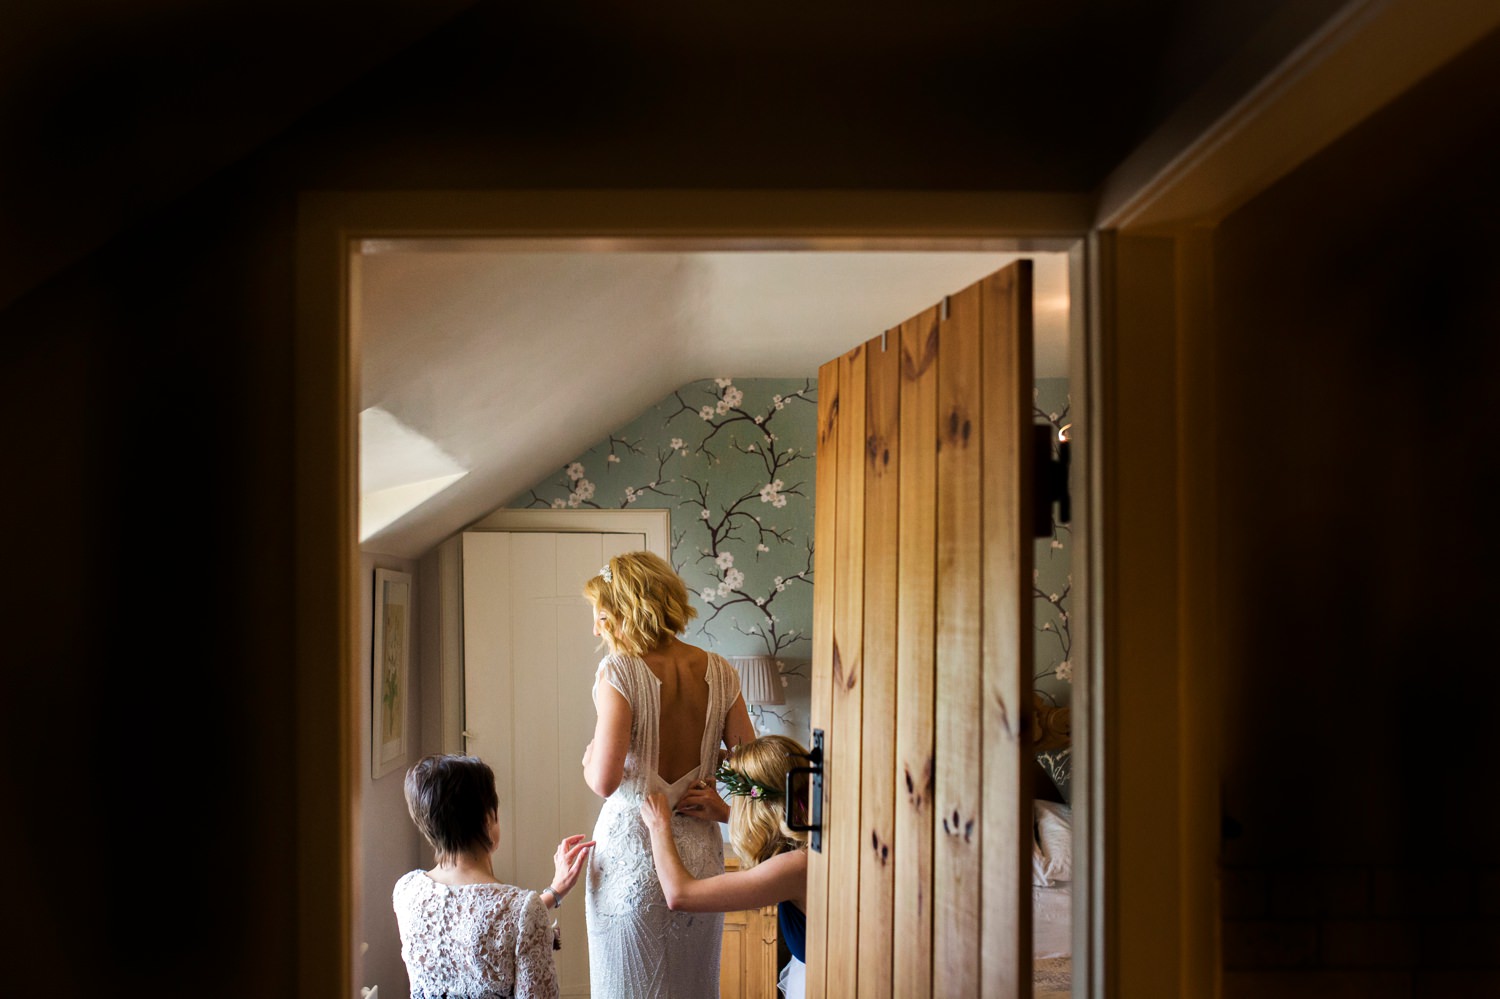 Wedding Photos Doxford Barns by Phil Smith Photography